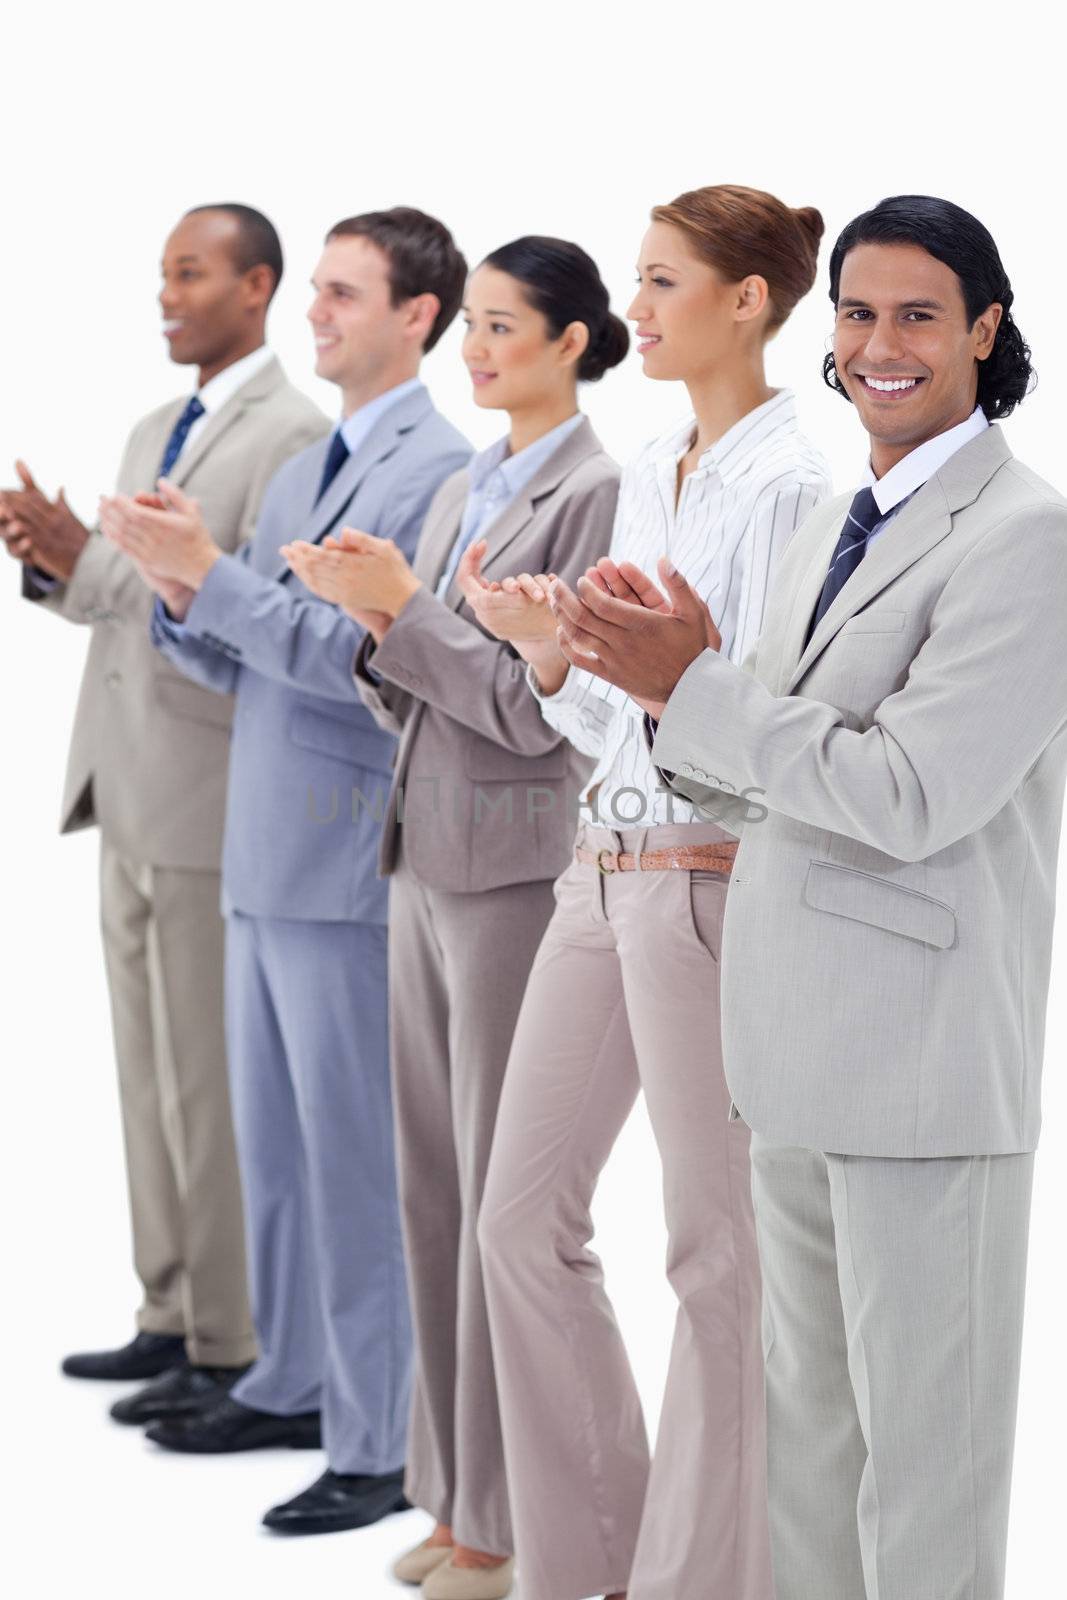 Business team smiling and applauding while looking towards the left side except for one against white background